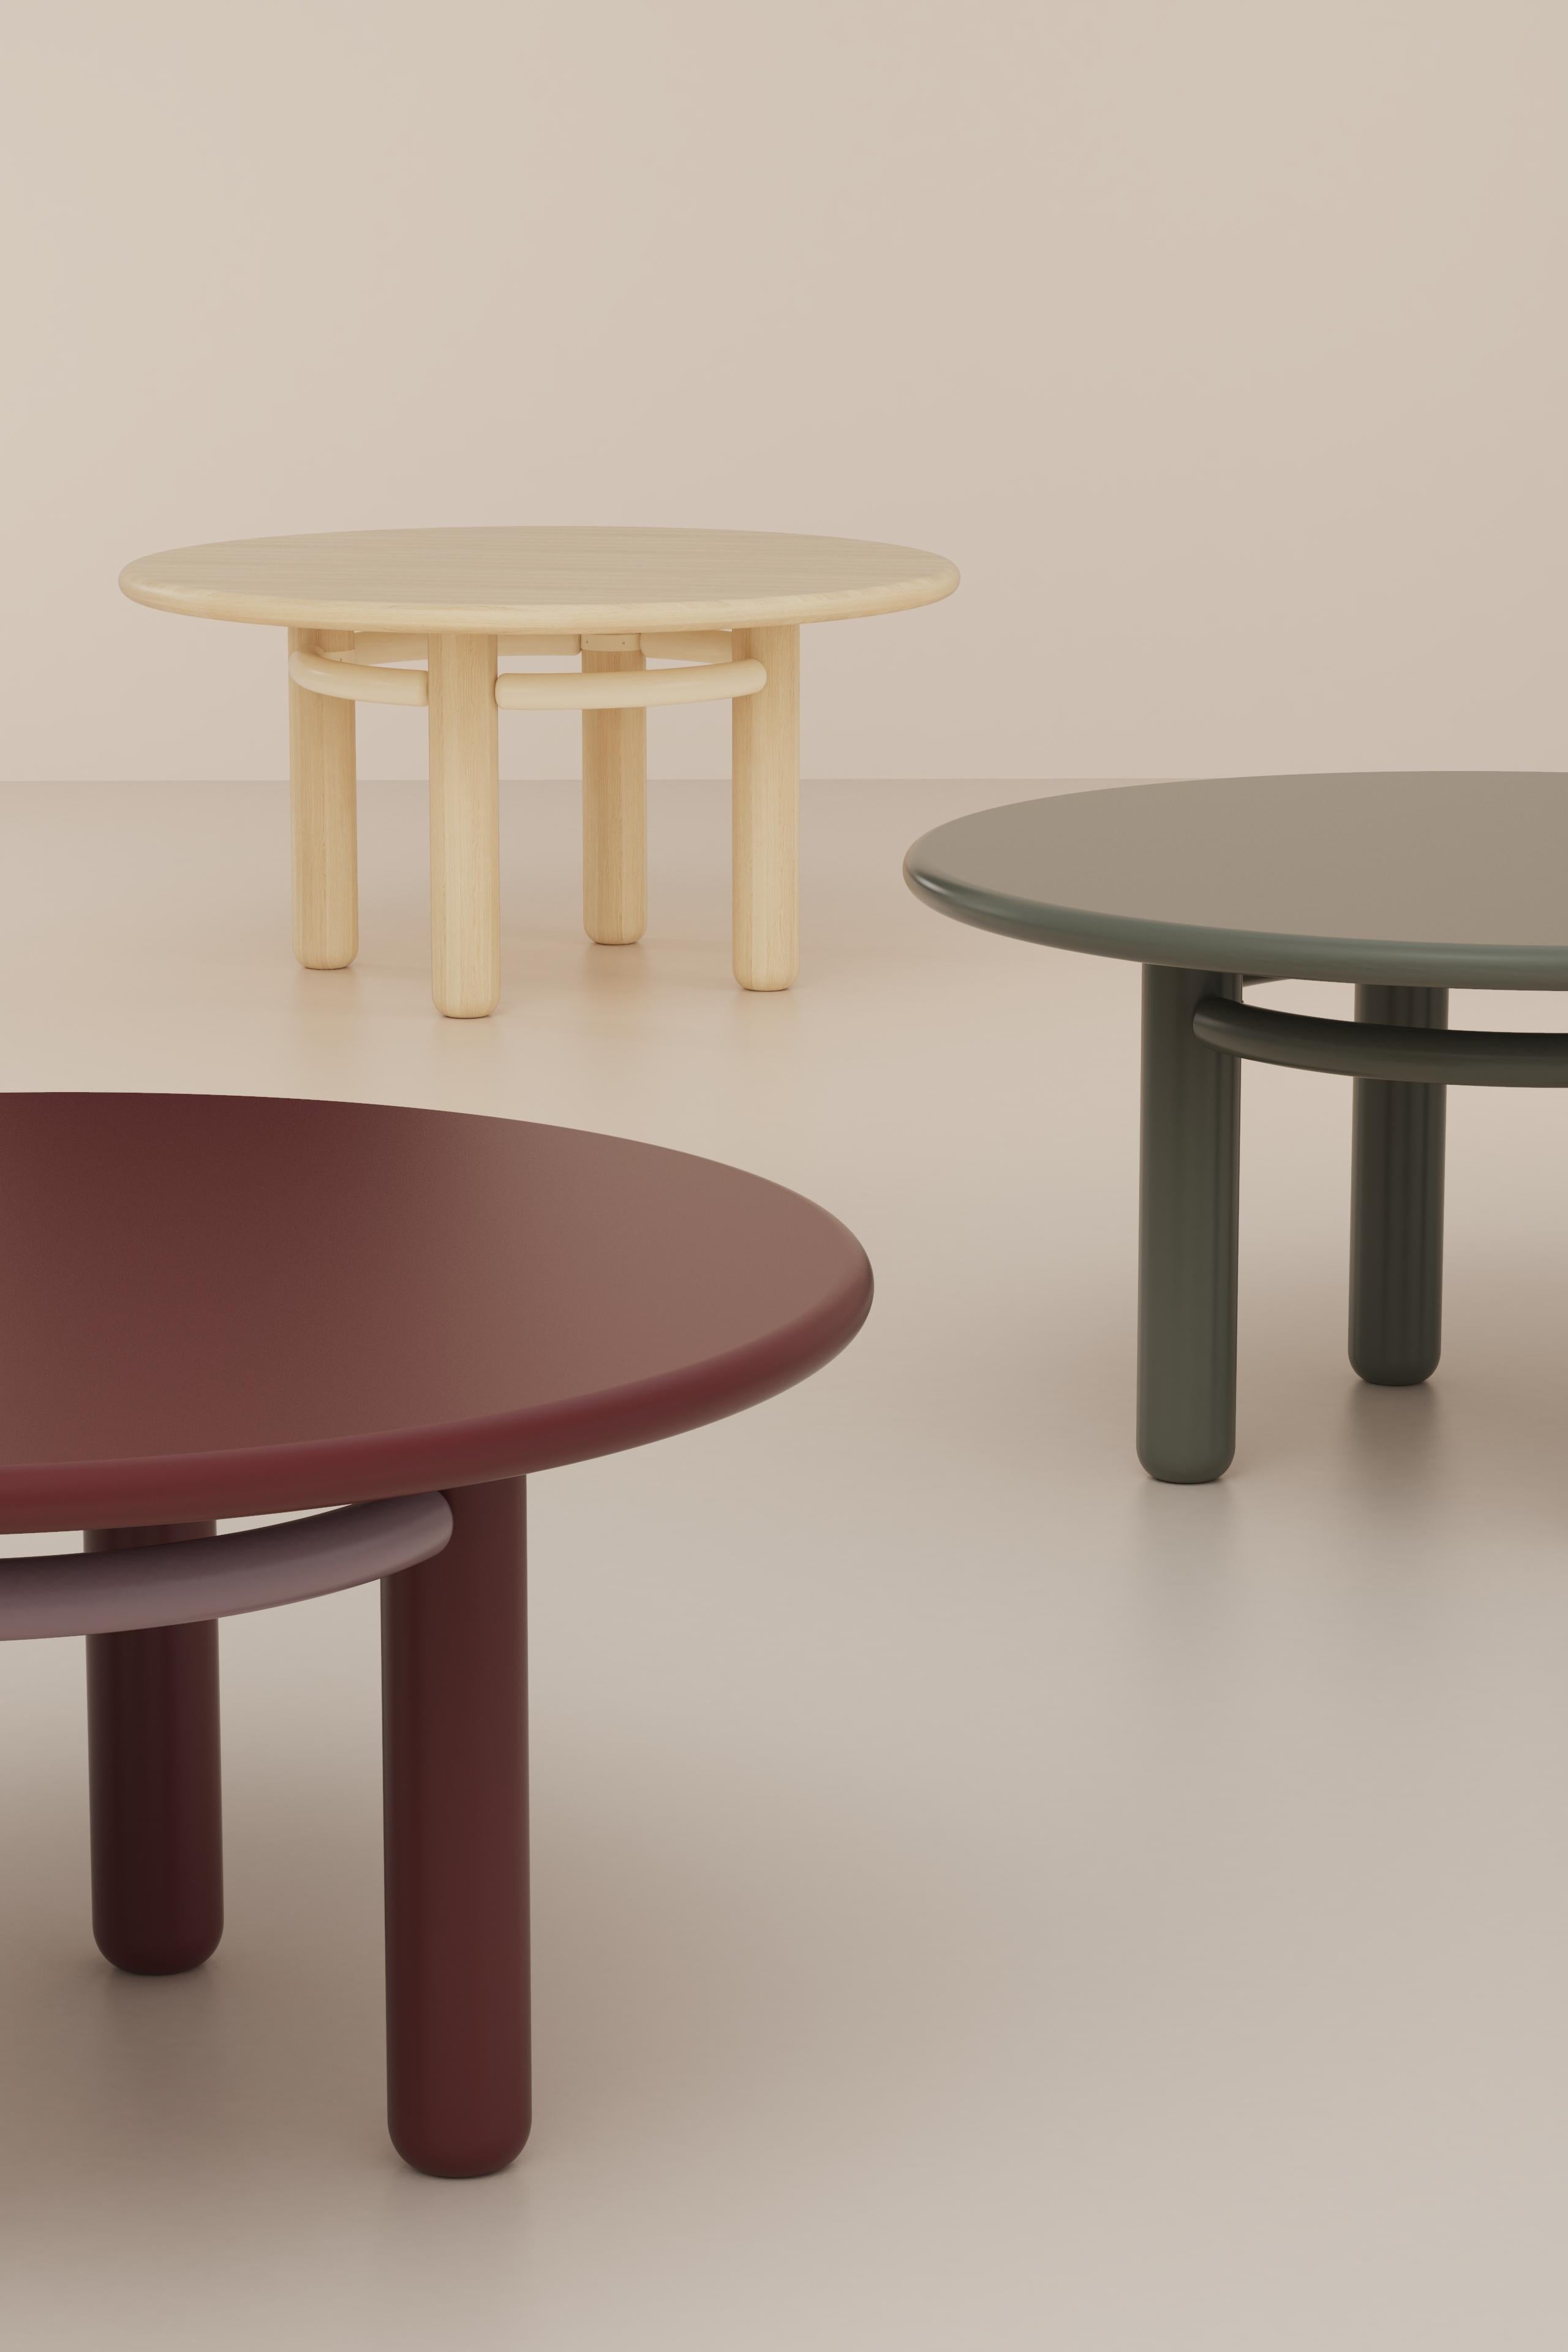 KAI dinner table with lacquered wood feet, oak wood top and steel structure.
Measure : 150cm diameter. 
The feet, the structure and the top are available in a selection of curated materials and finishings from our collection. Completely